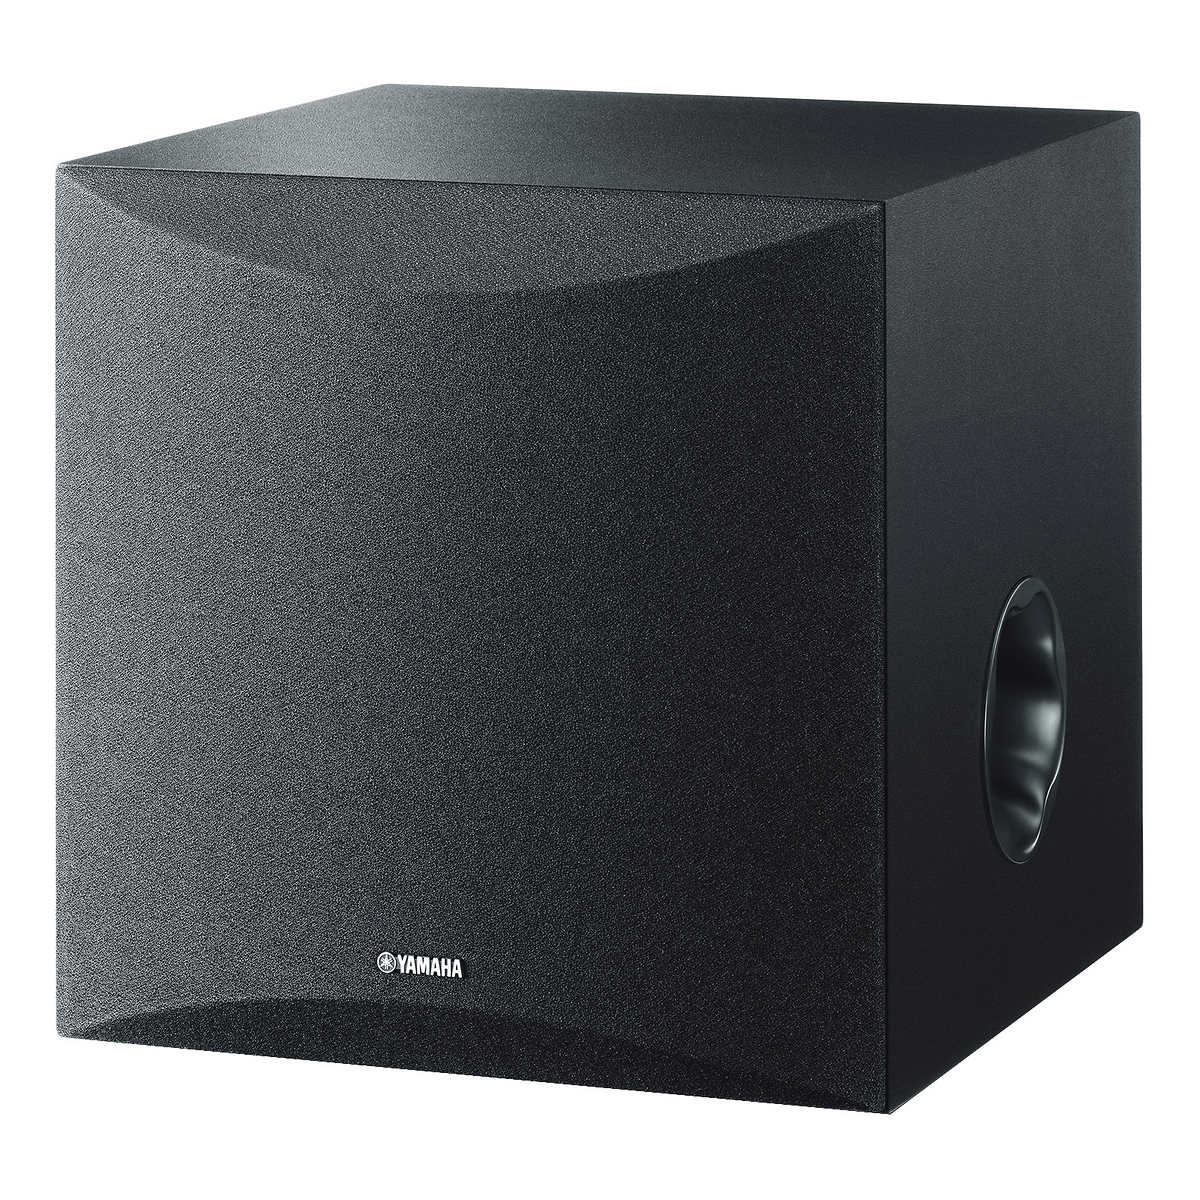 Yamaha NSSW050 B 8 in. Subwoofer | Costco